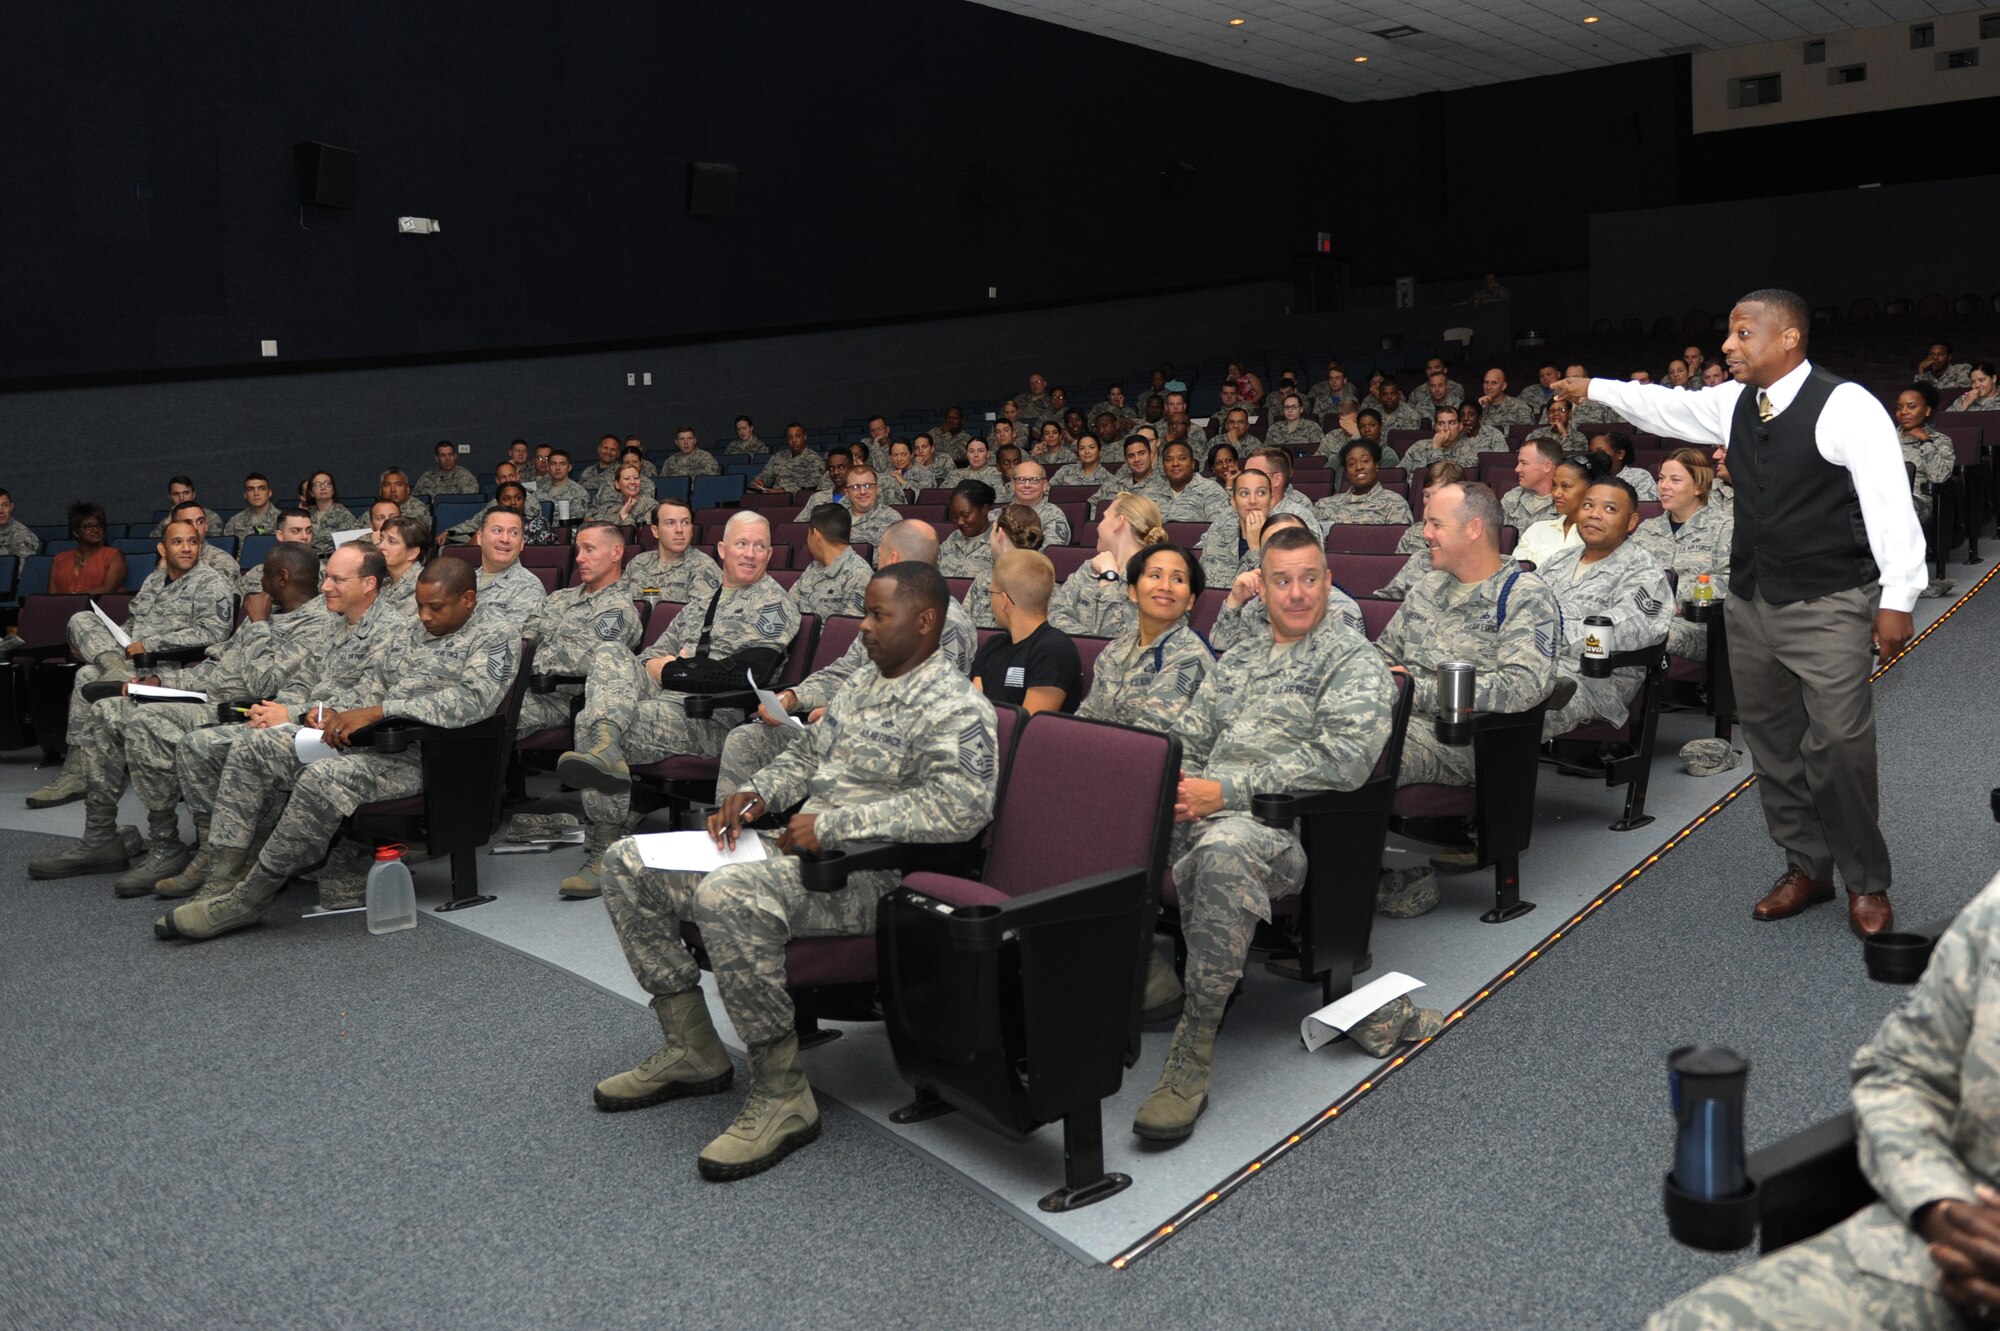 Retired Chief Master Sgt. Anthony Brinkley speaks at a leadership and personal development seminar at the Welch Theater June 24, 2016 on Keesler Air Force Base, Miss. Brinkley, with more than 28 years of military experience, is delivering seminars highlighting leadership development, motivational speaking and team building to military members and civilians at all 2nd Air Force bases. (U.S. Air Force photo by Kemberly Groue/Released)